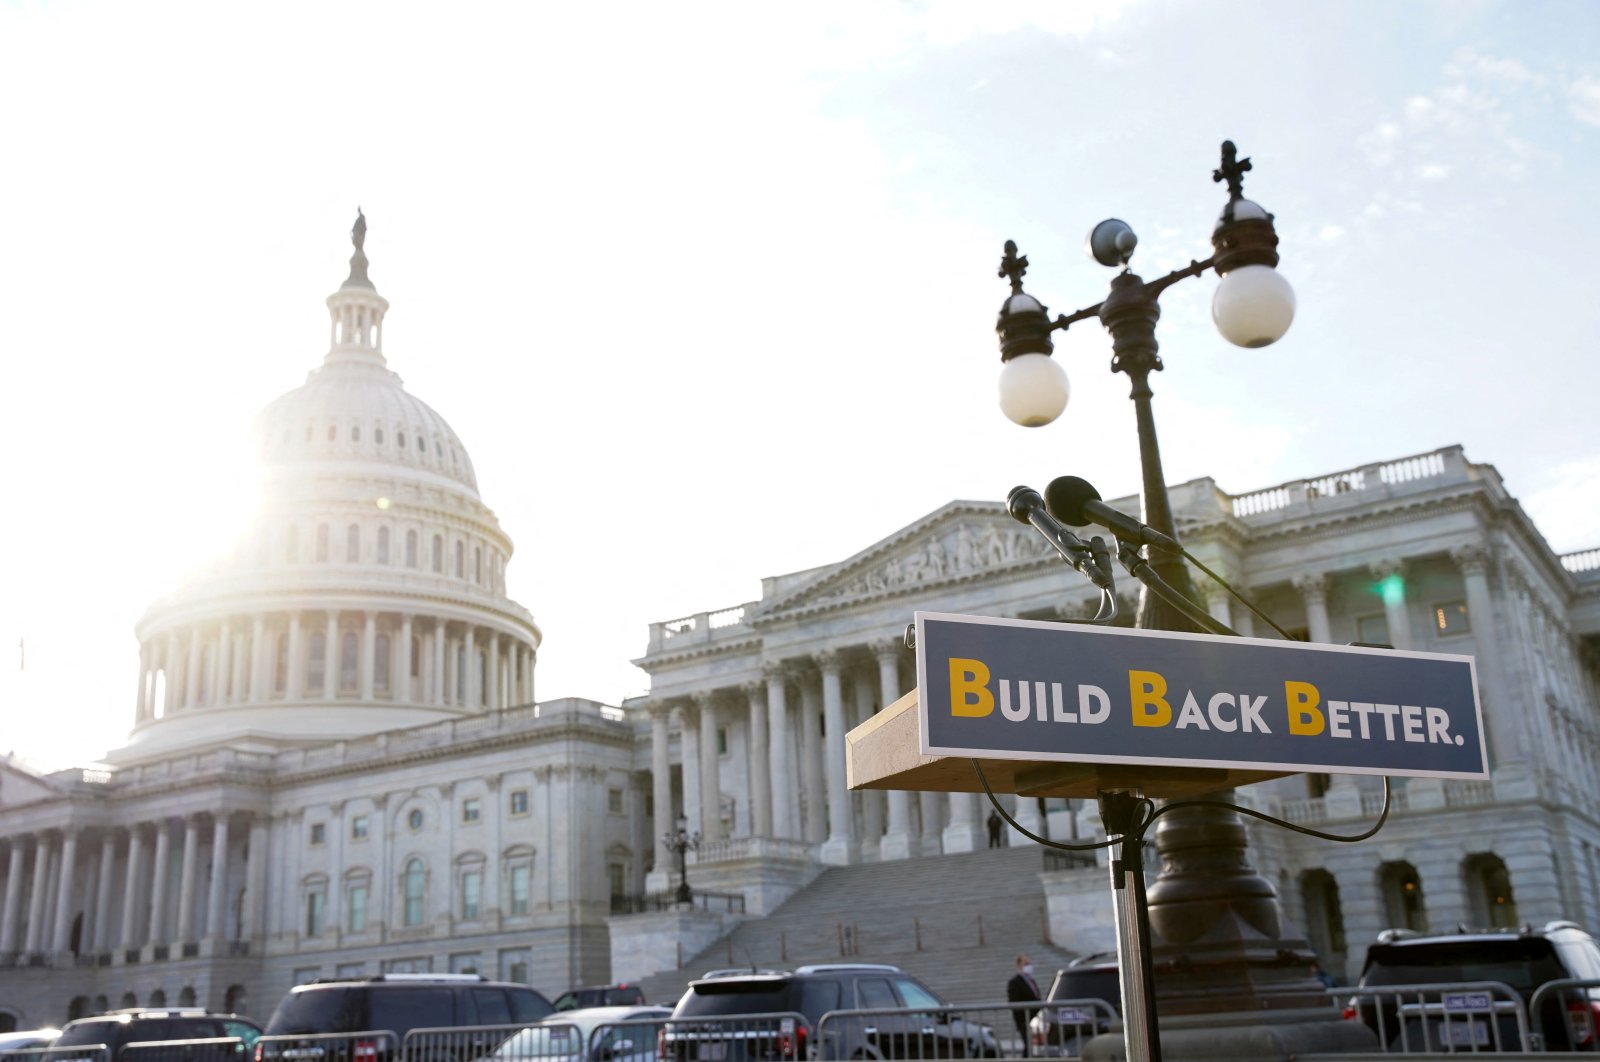 A lectern is seen before the start of a media event about the Build Back Better package with Senate Democrats outside the U.S. Capitol in Washington, D.C., U.S., Dec. 15, 2021. (Reuters Photo)